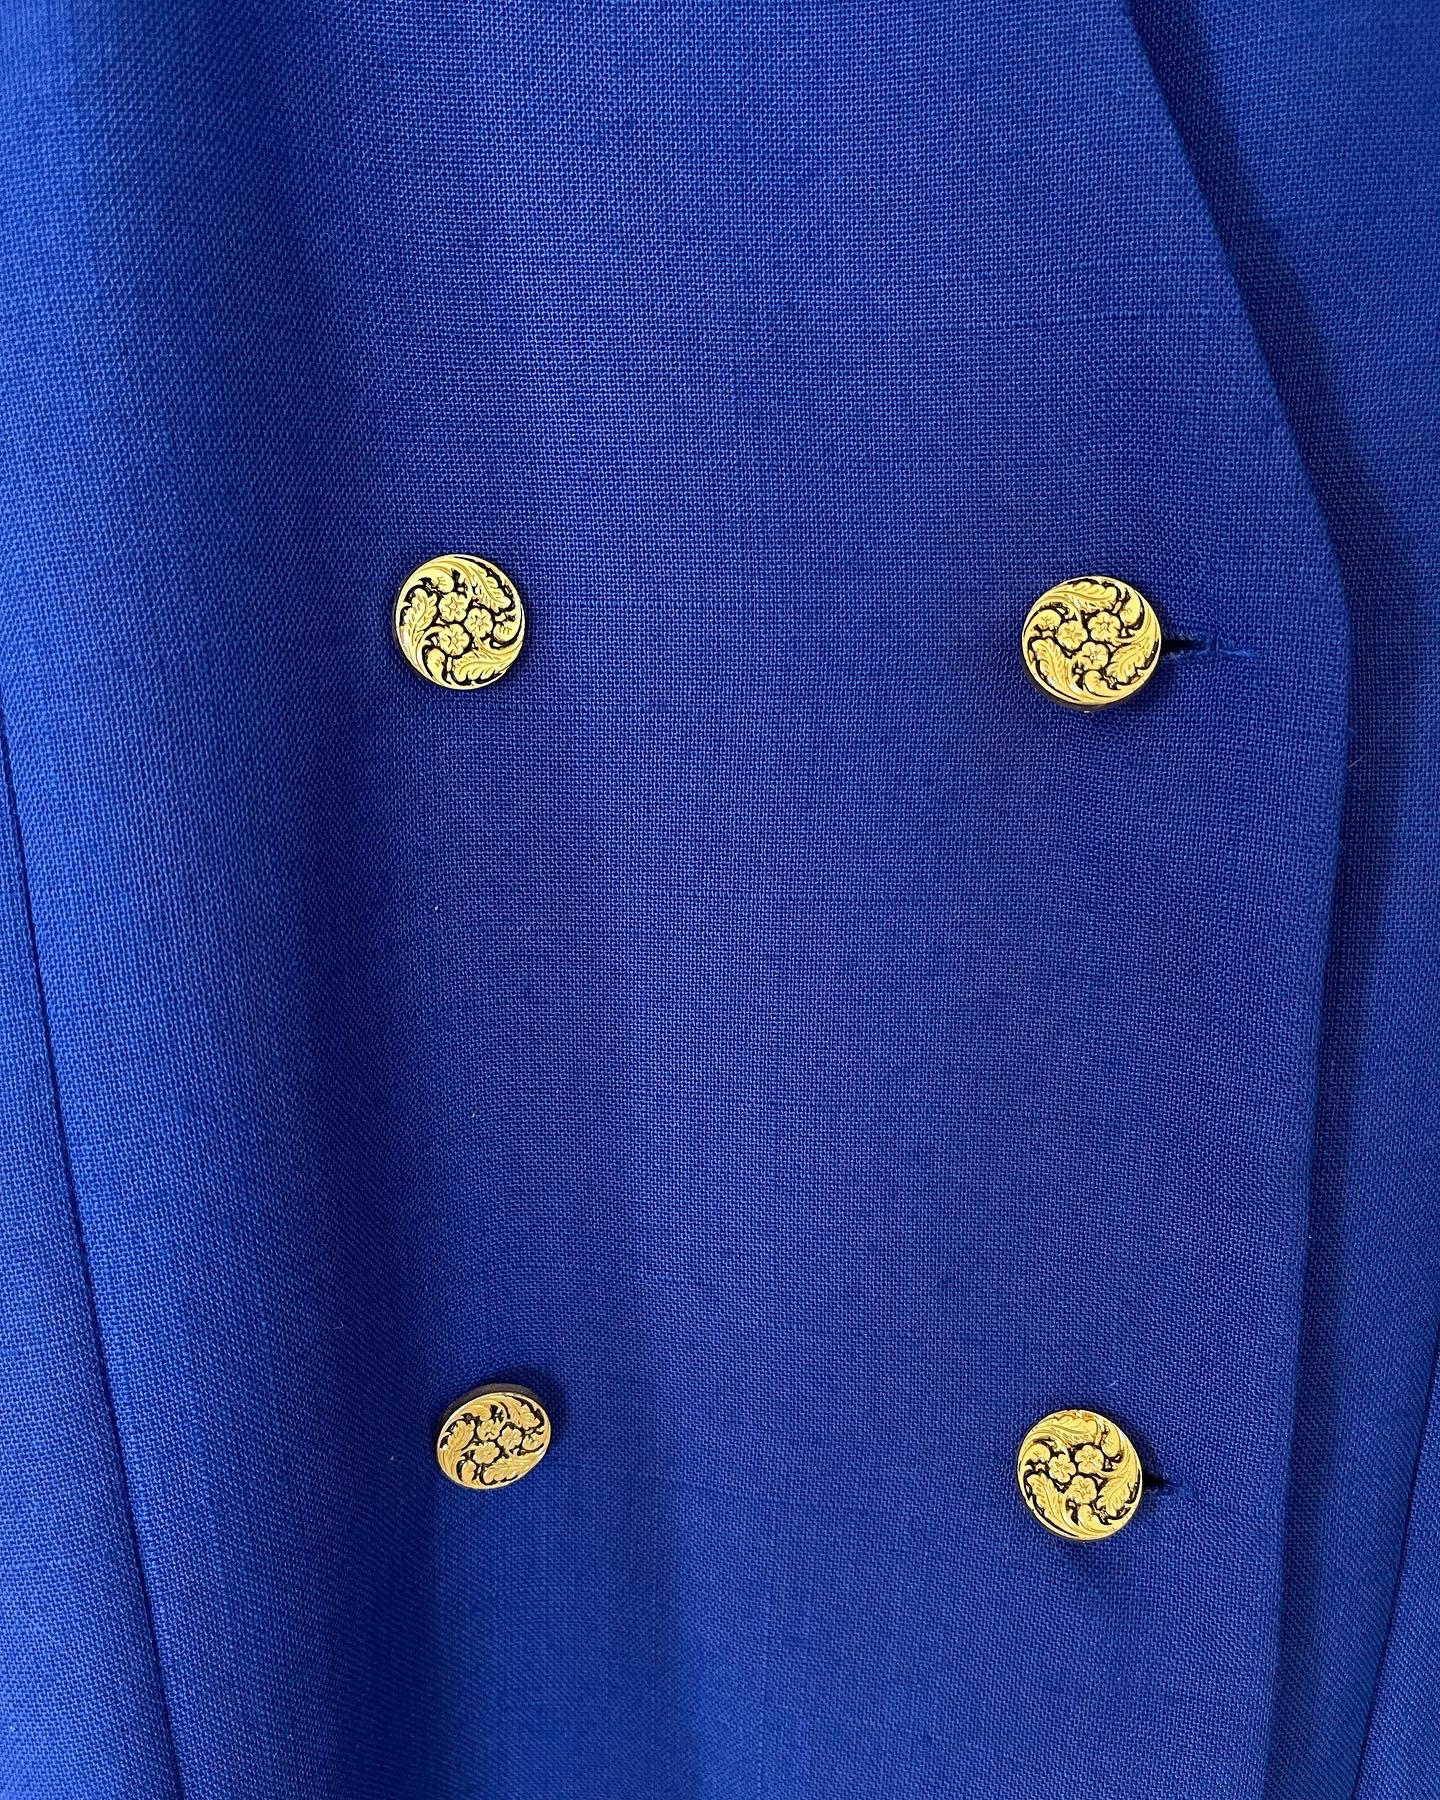 Vintage blouse with beautiful gold-tone buttons